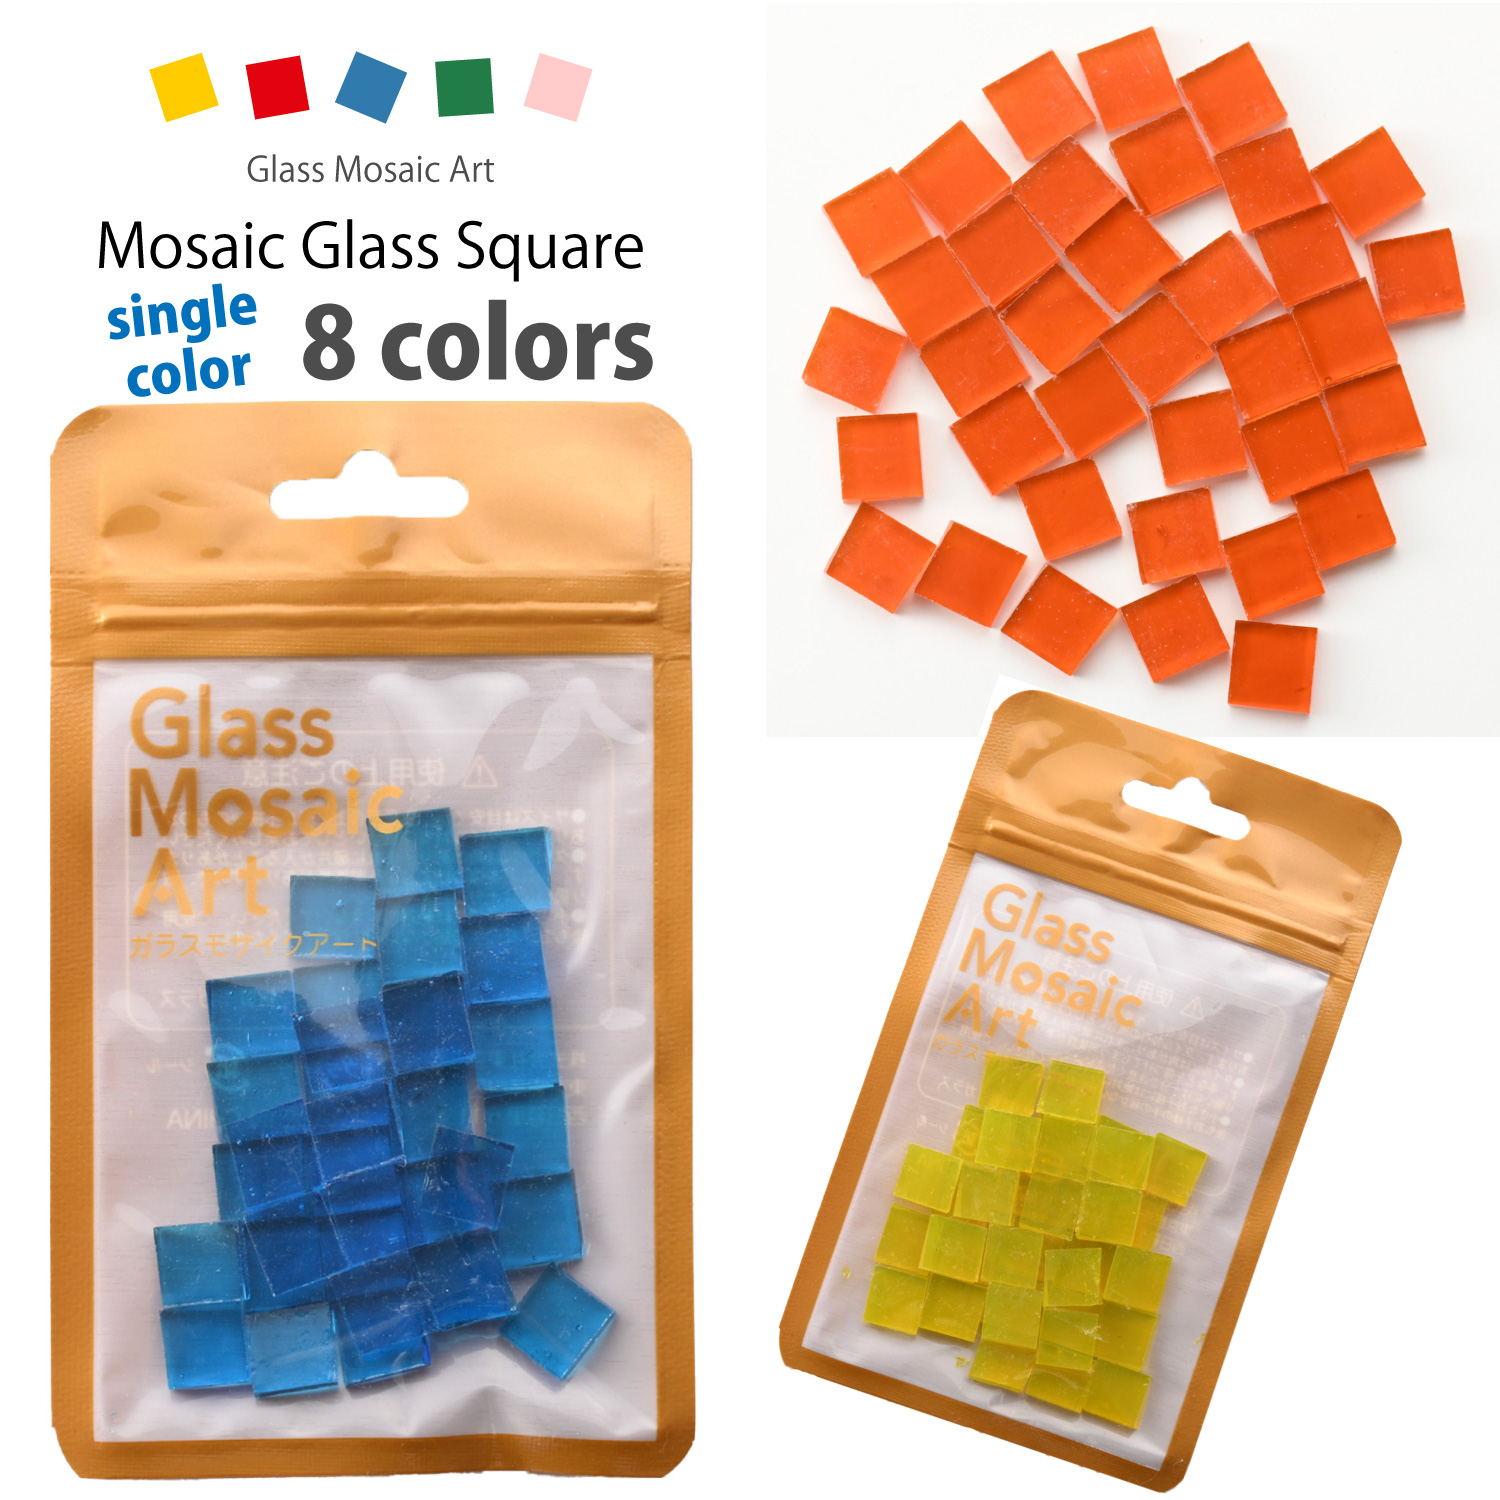 《Glass Mosaic Art》Glass Parts Square Approx. 10x10mm Single Color (Bag)